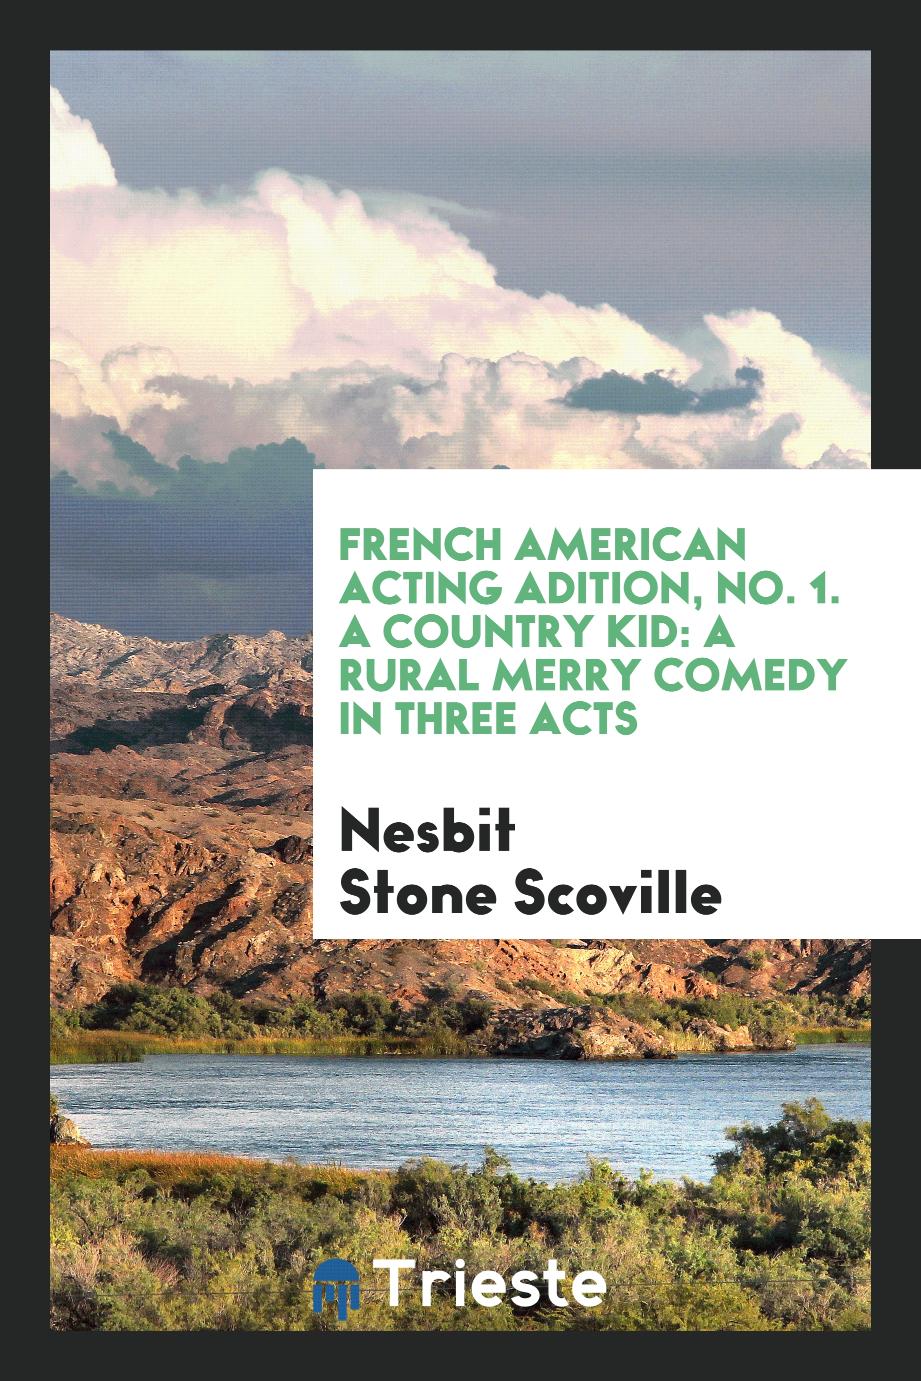 French American acting adition, No. 1. A country kid: a rural merry comedy in three acts